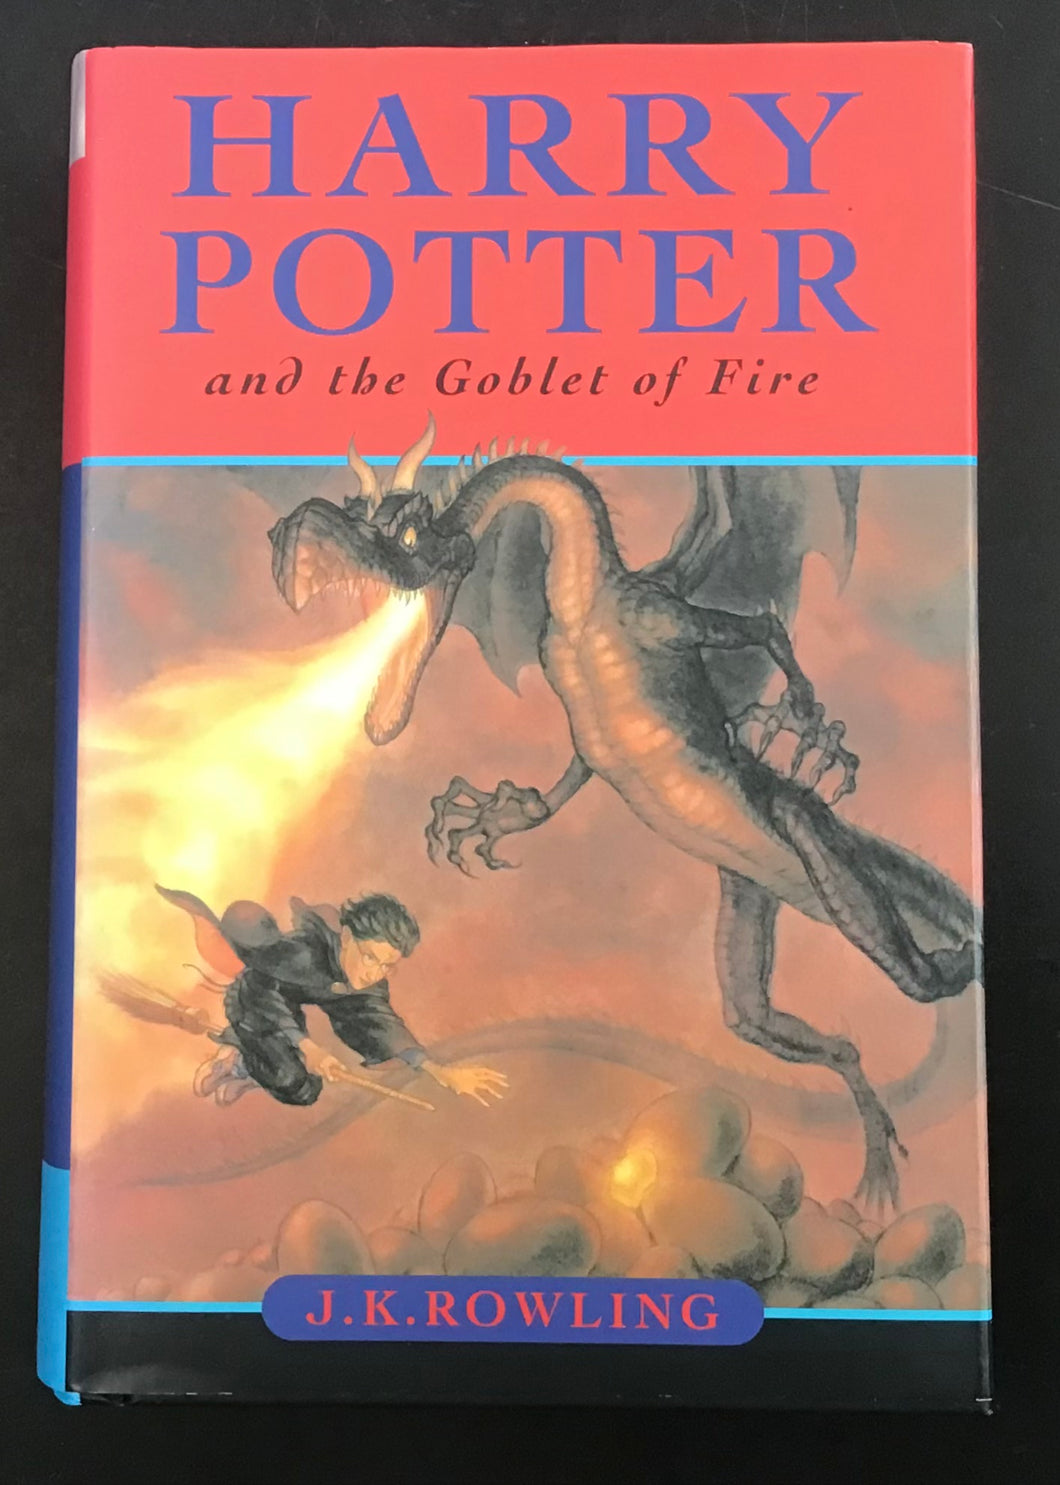 Harry Potter and The Goblet of Fire, J.K. Rowling